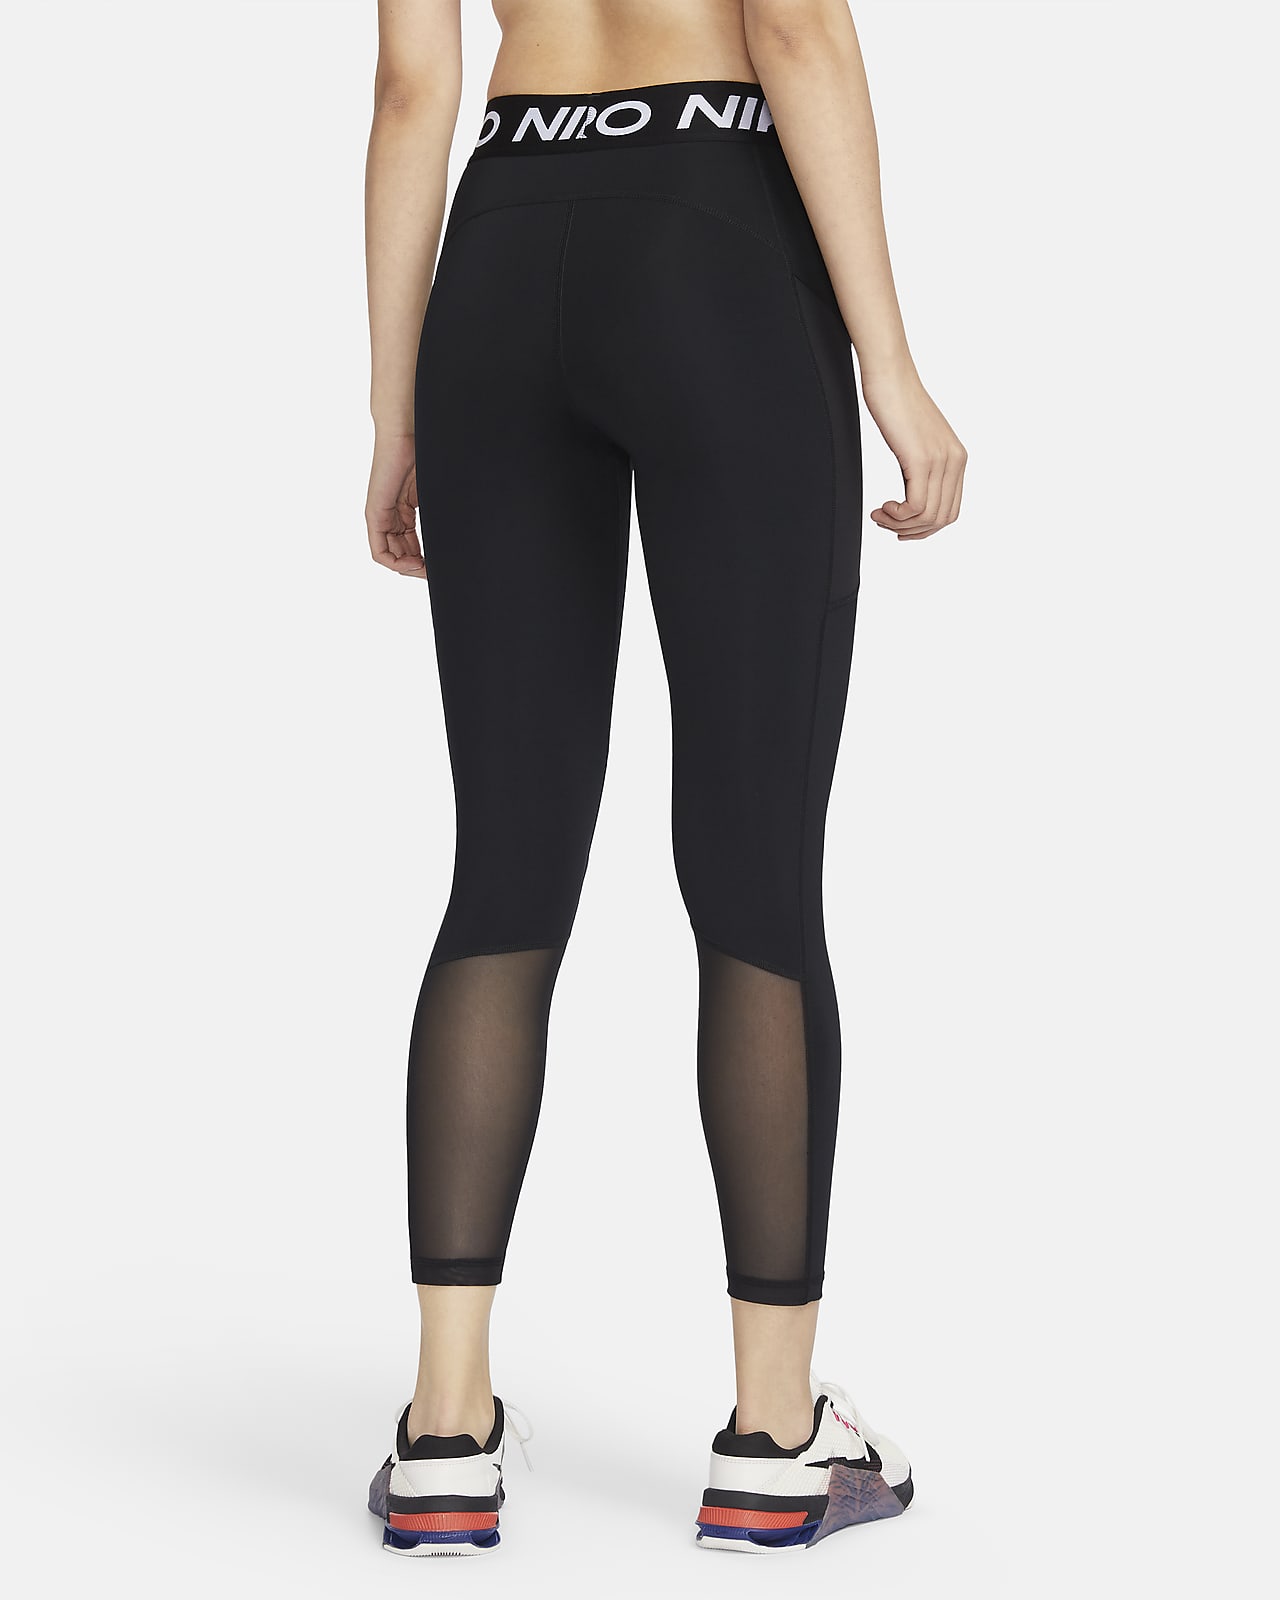 Nike Pro Women's High-Waisted Leggings with Pockets - Black